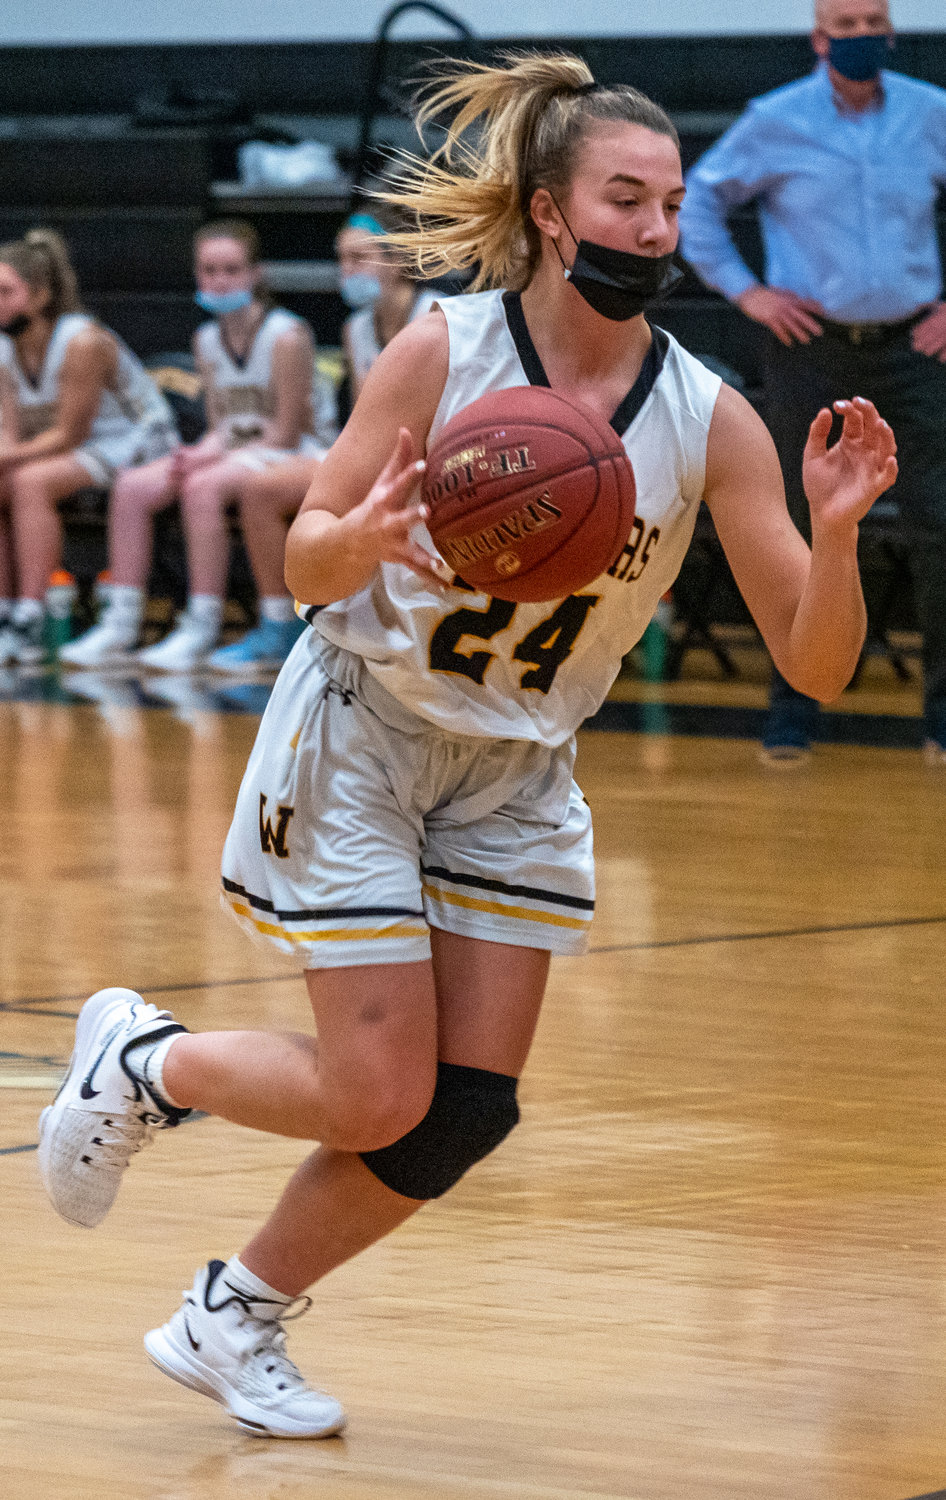 Senior Madison Taylor matched her uniform number with 24 points Jan. 5 as Wantagh rallied to defeat neighboring Seaford, 46-41.